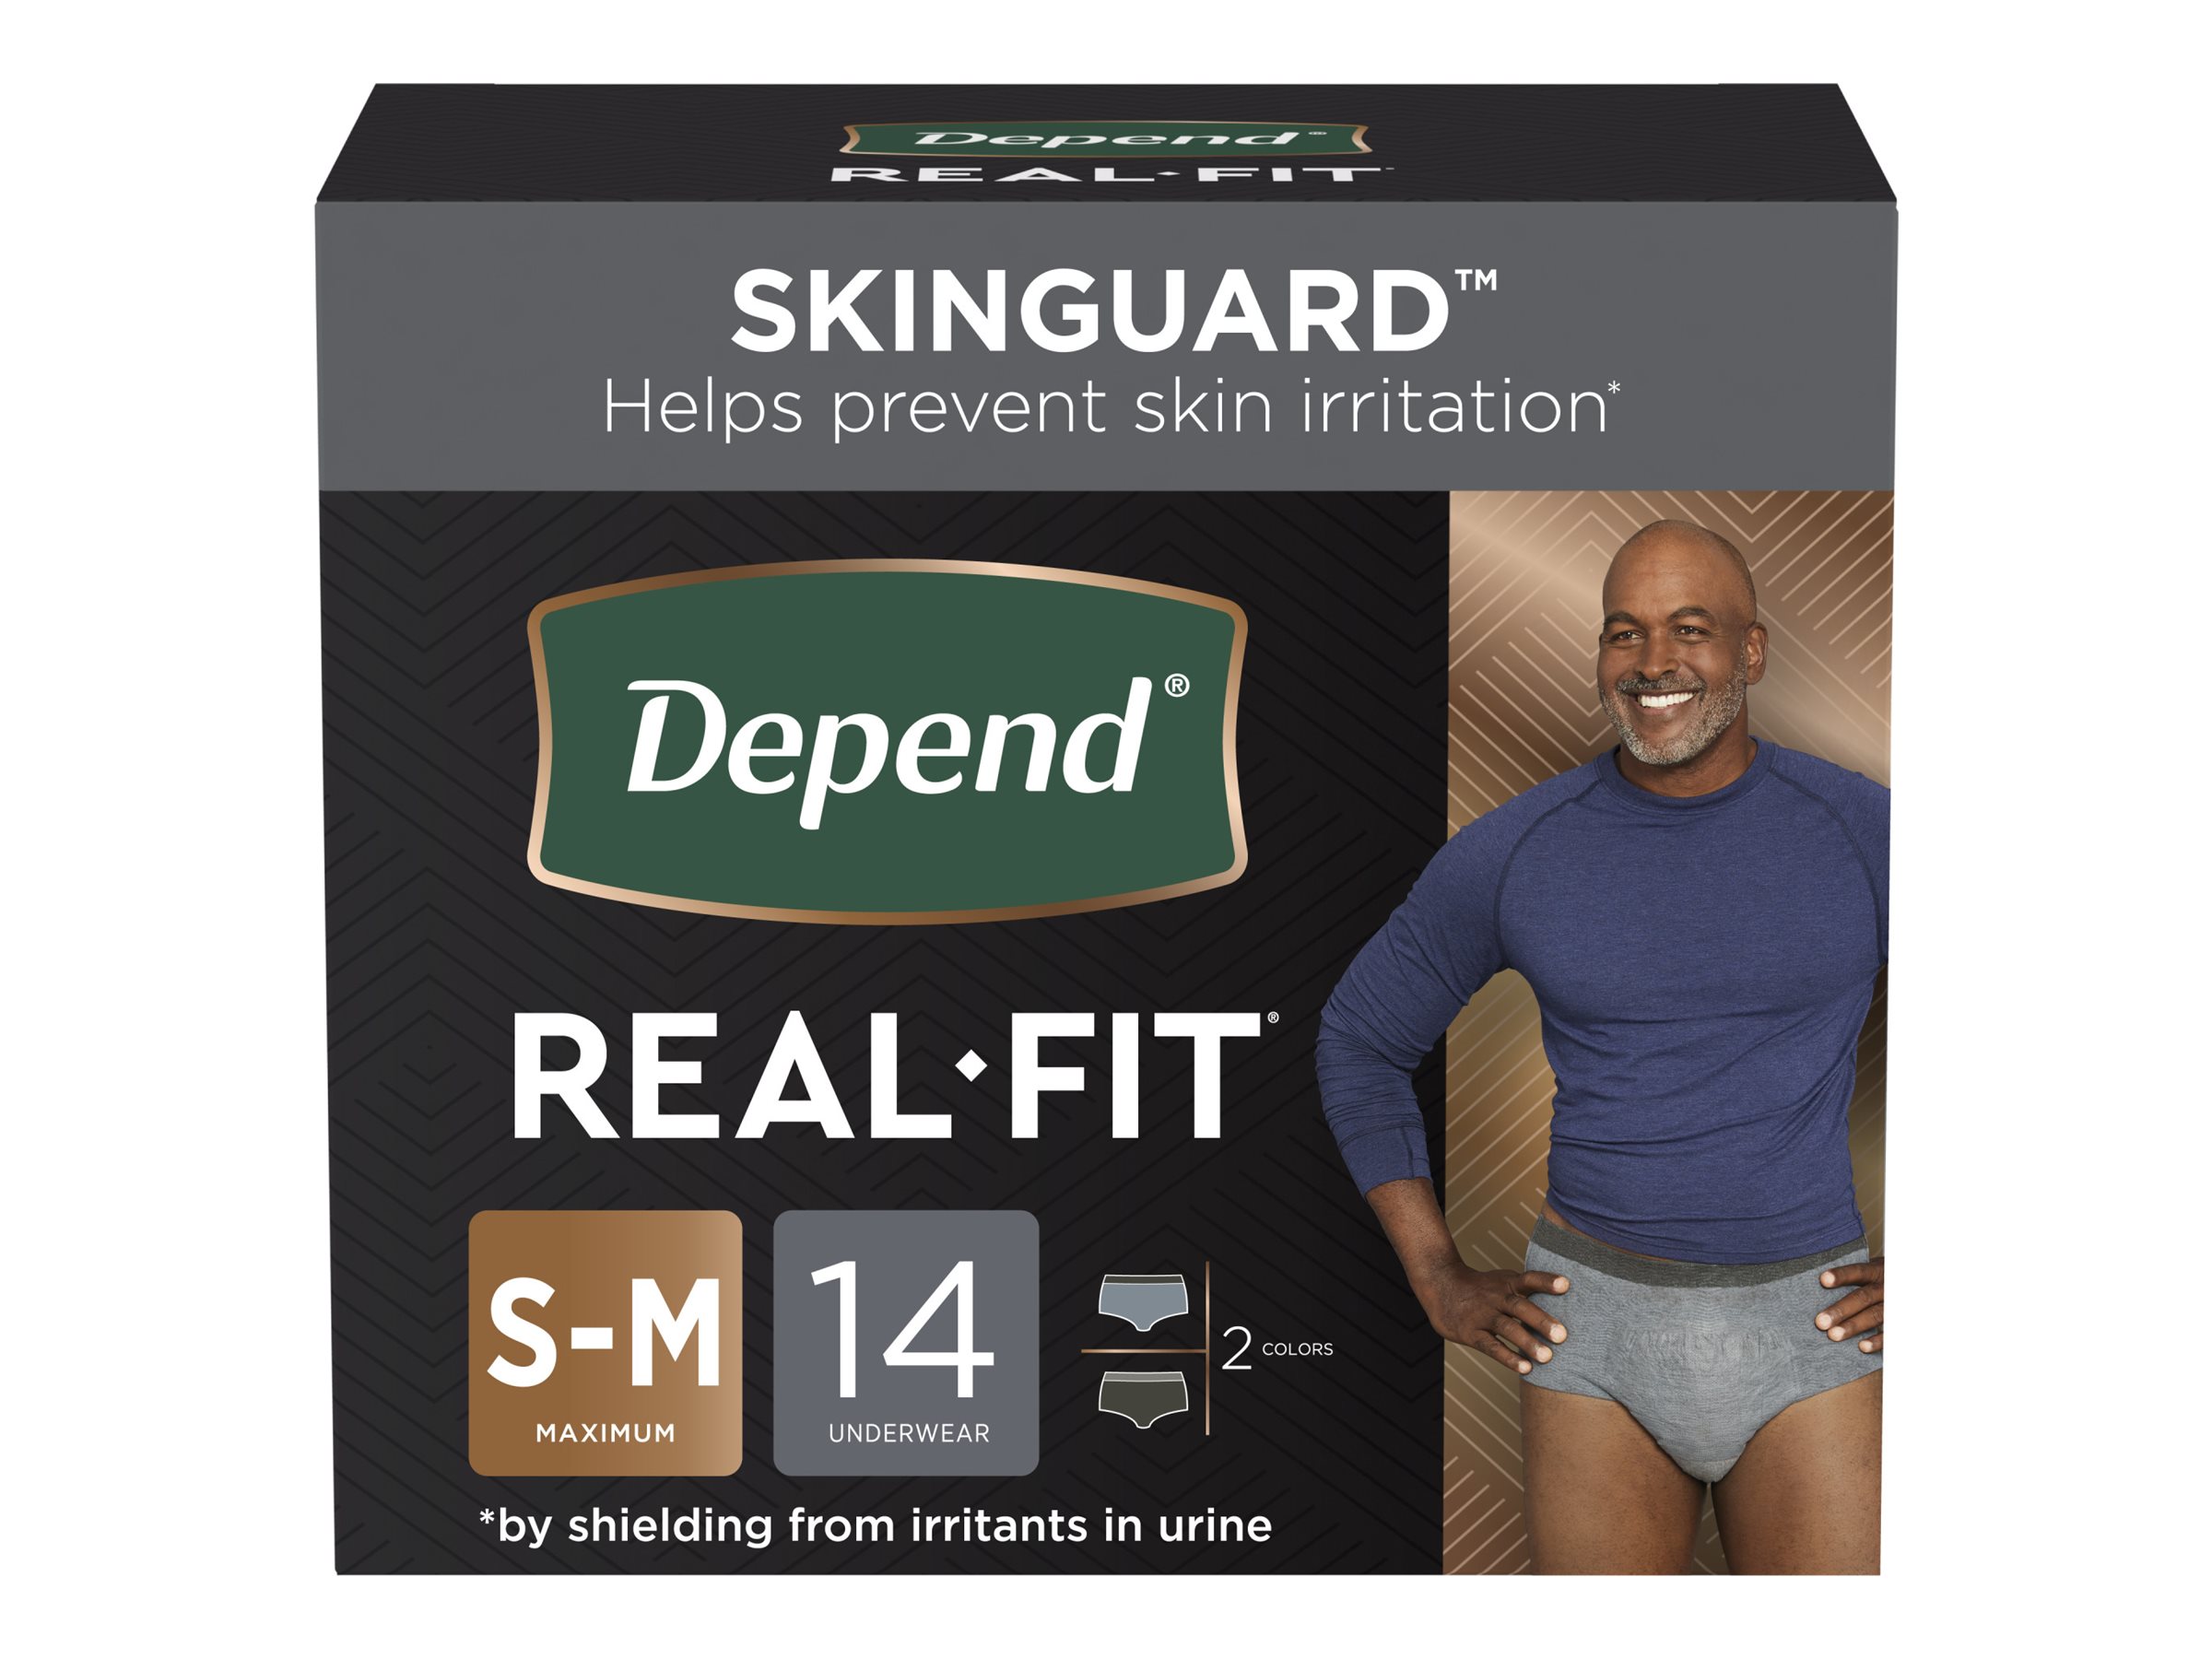 Depend Protection Plus Ultimate Underwear For Men - Small/Medium